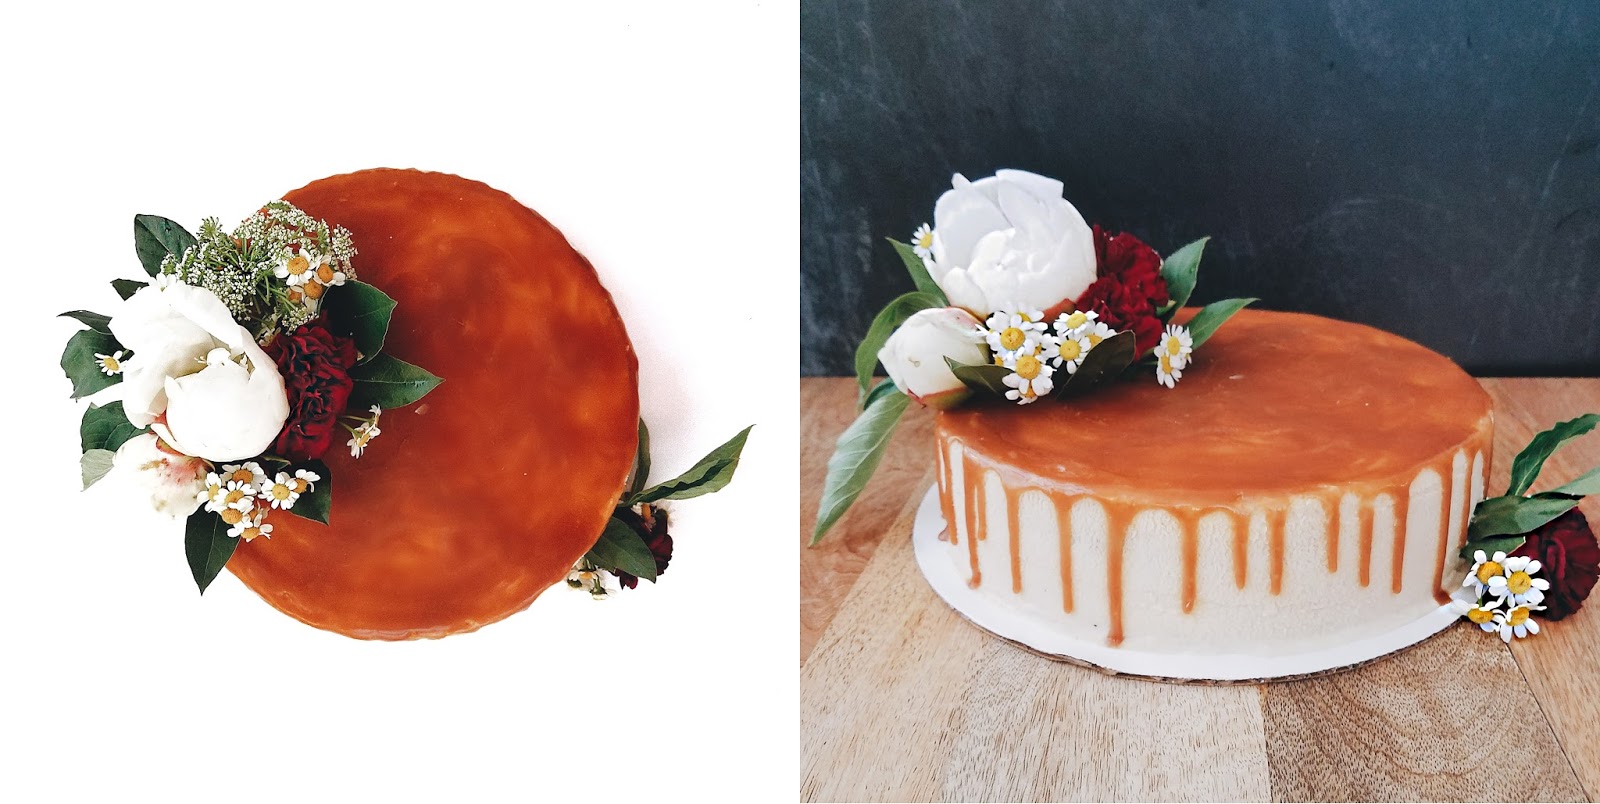 earl grey cheesecake with salty dark caramel topping, decorated with white peonies, red carnations, chamomile flowers, and green mist